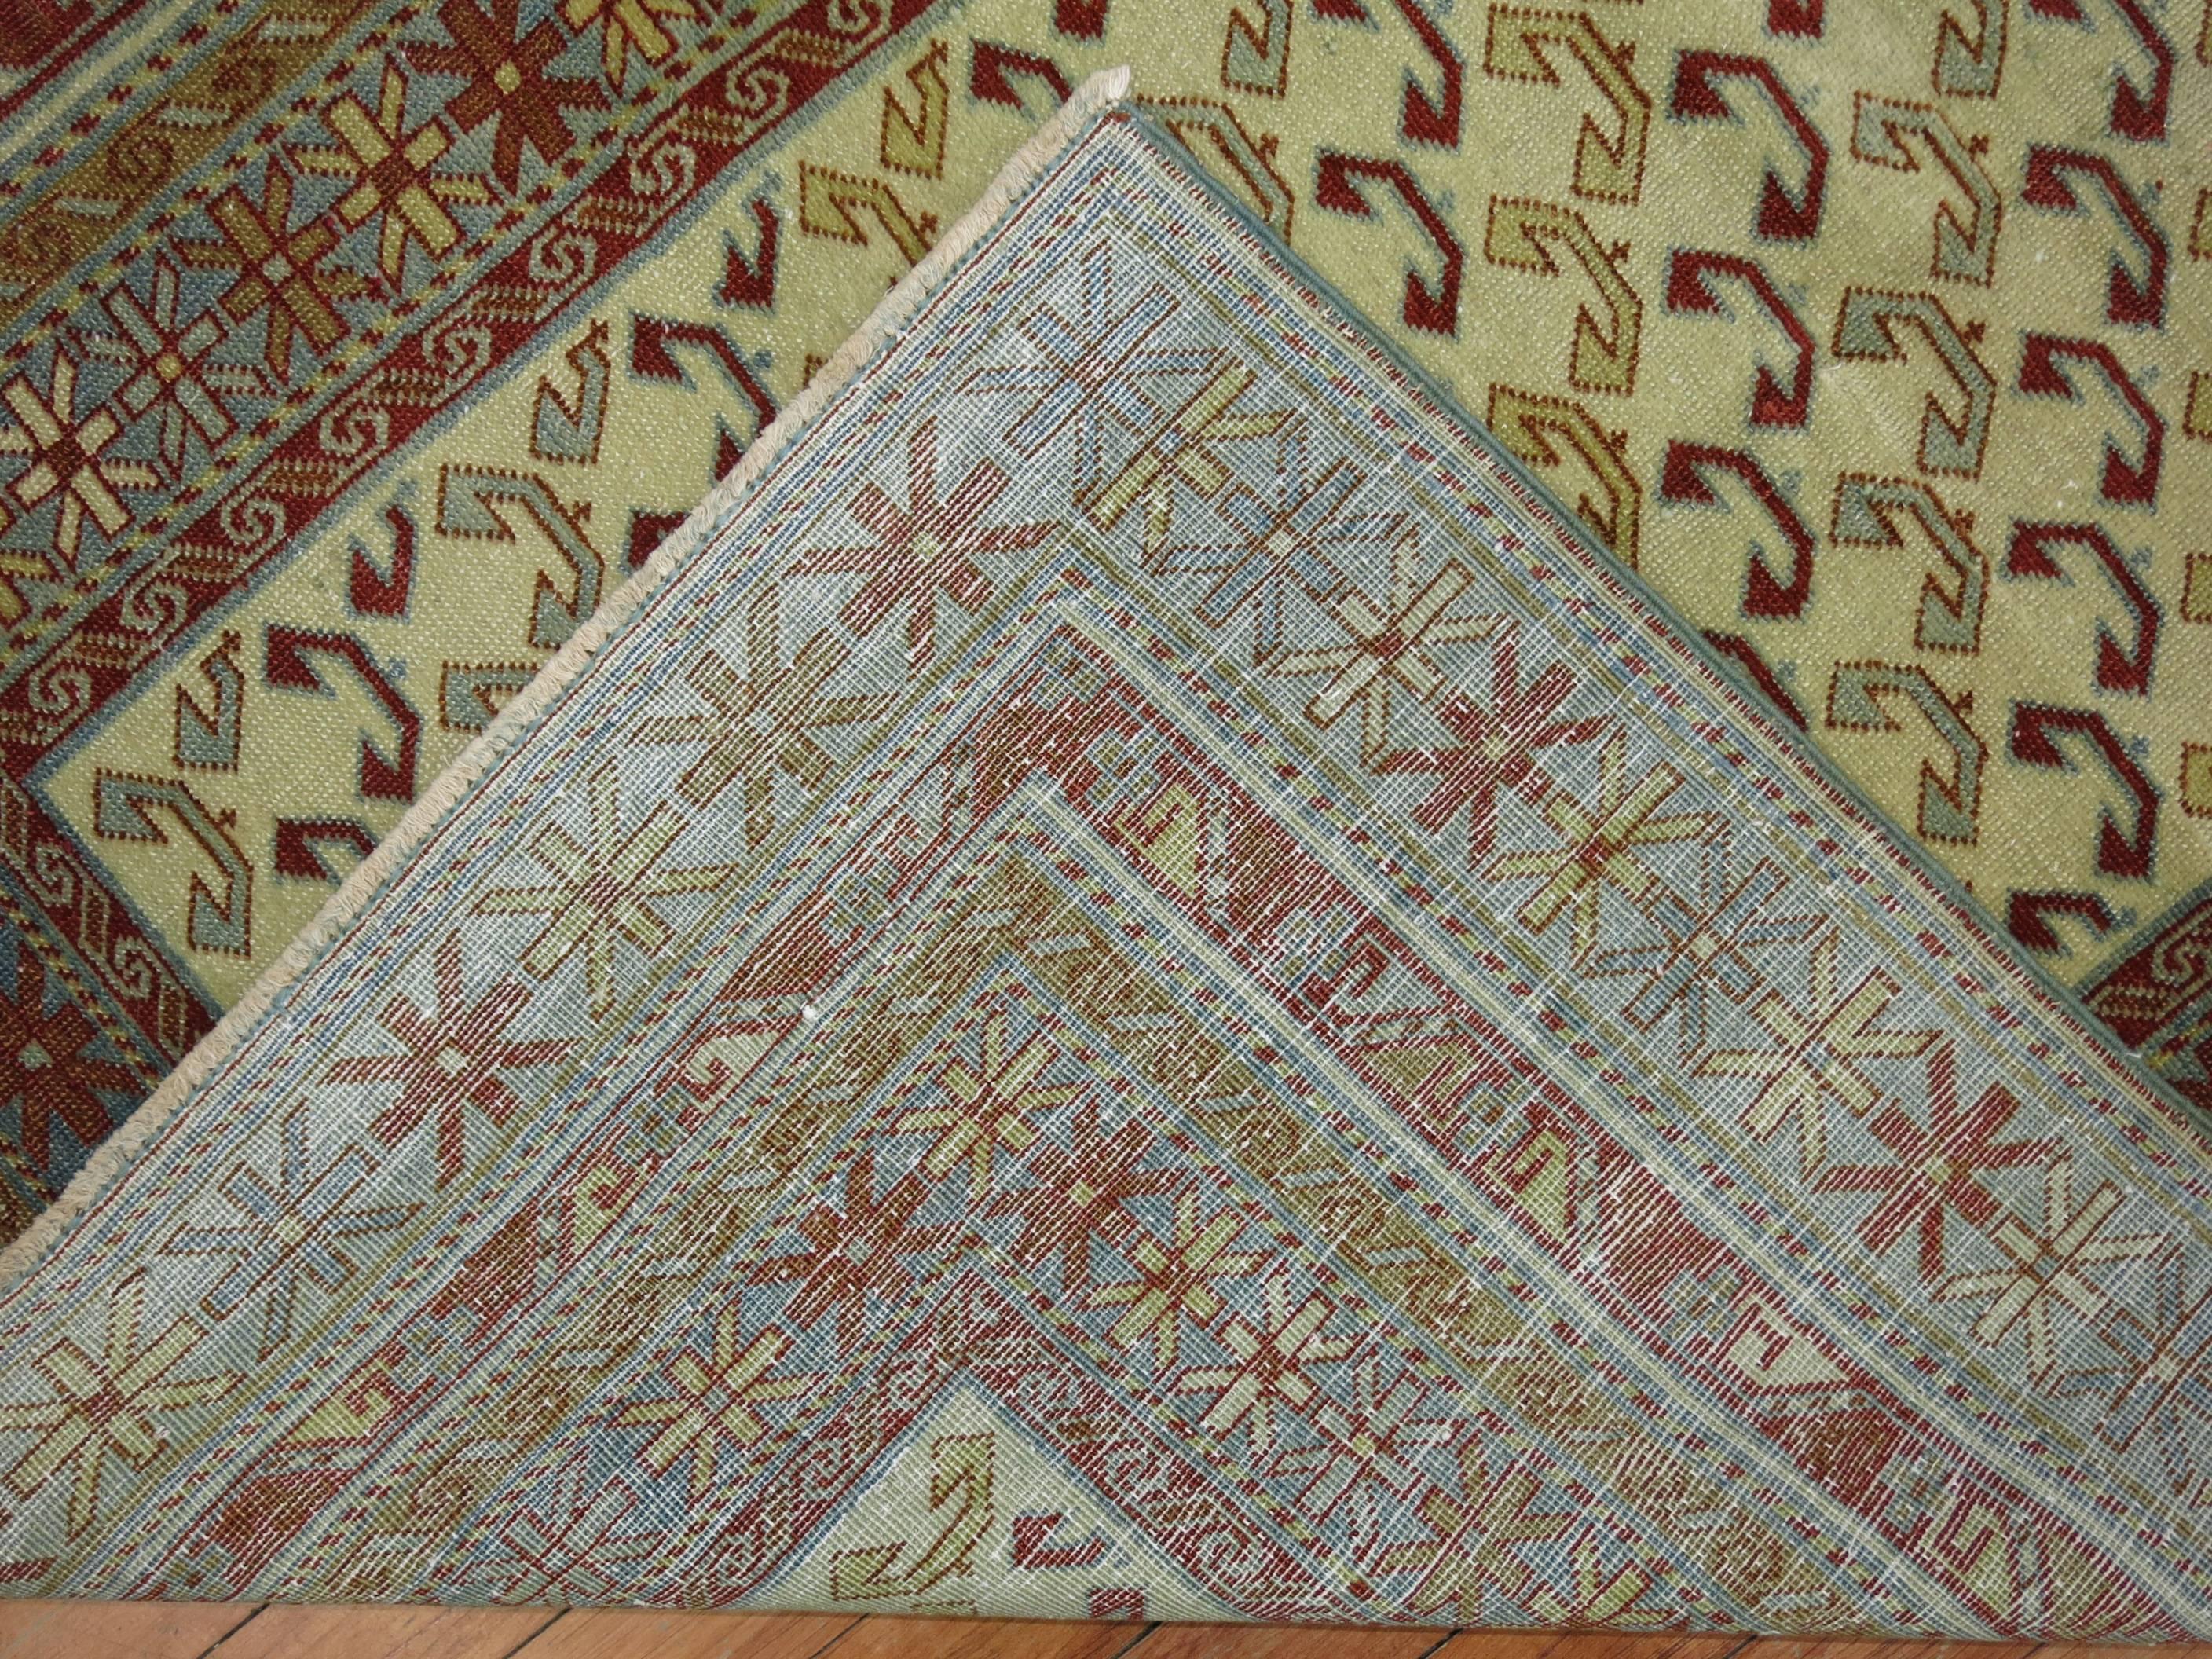 Vintage decorative Shirvan rug woven in the villages and mountains of the Caucasus with blue and red accents on a clear white ivory color ground.

Measures: 3'7